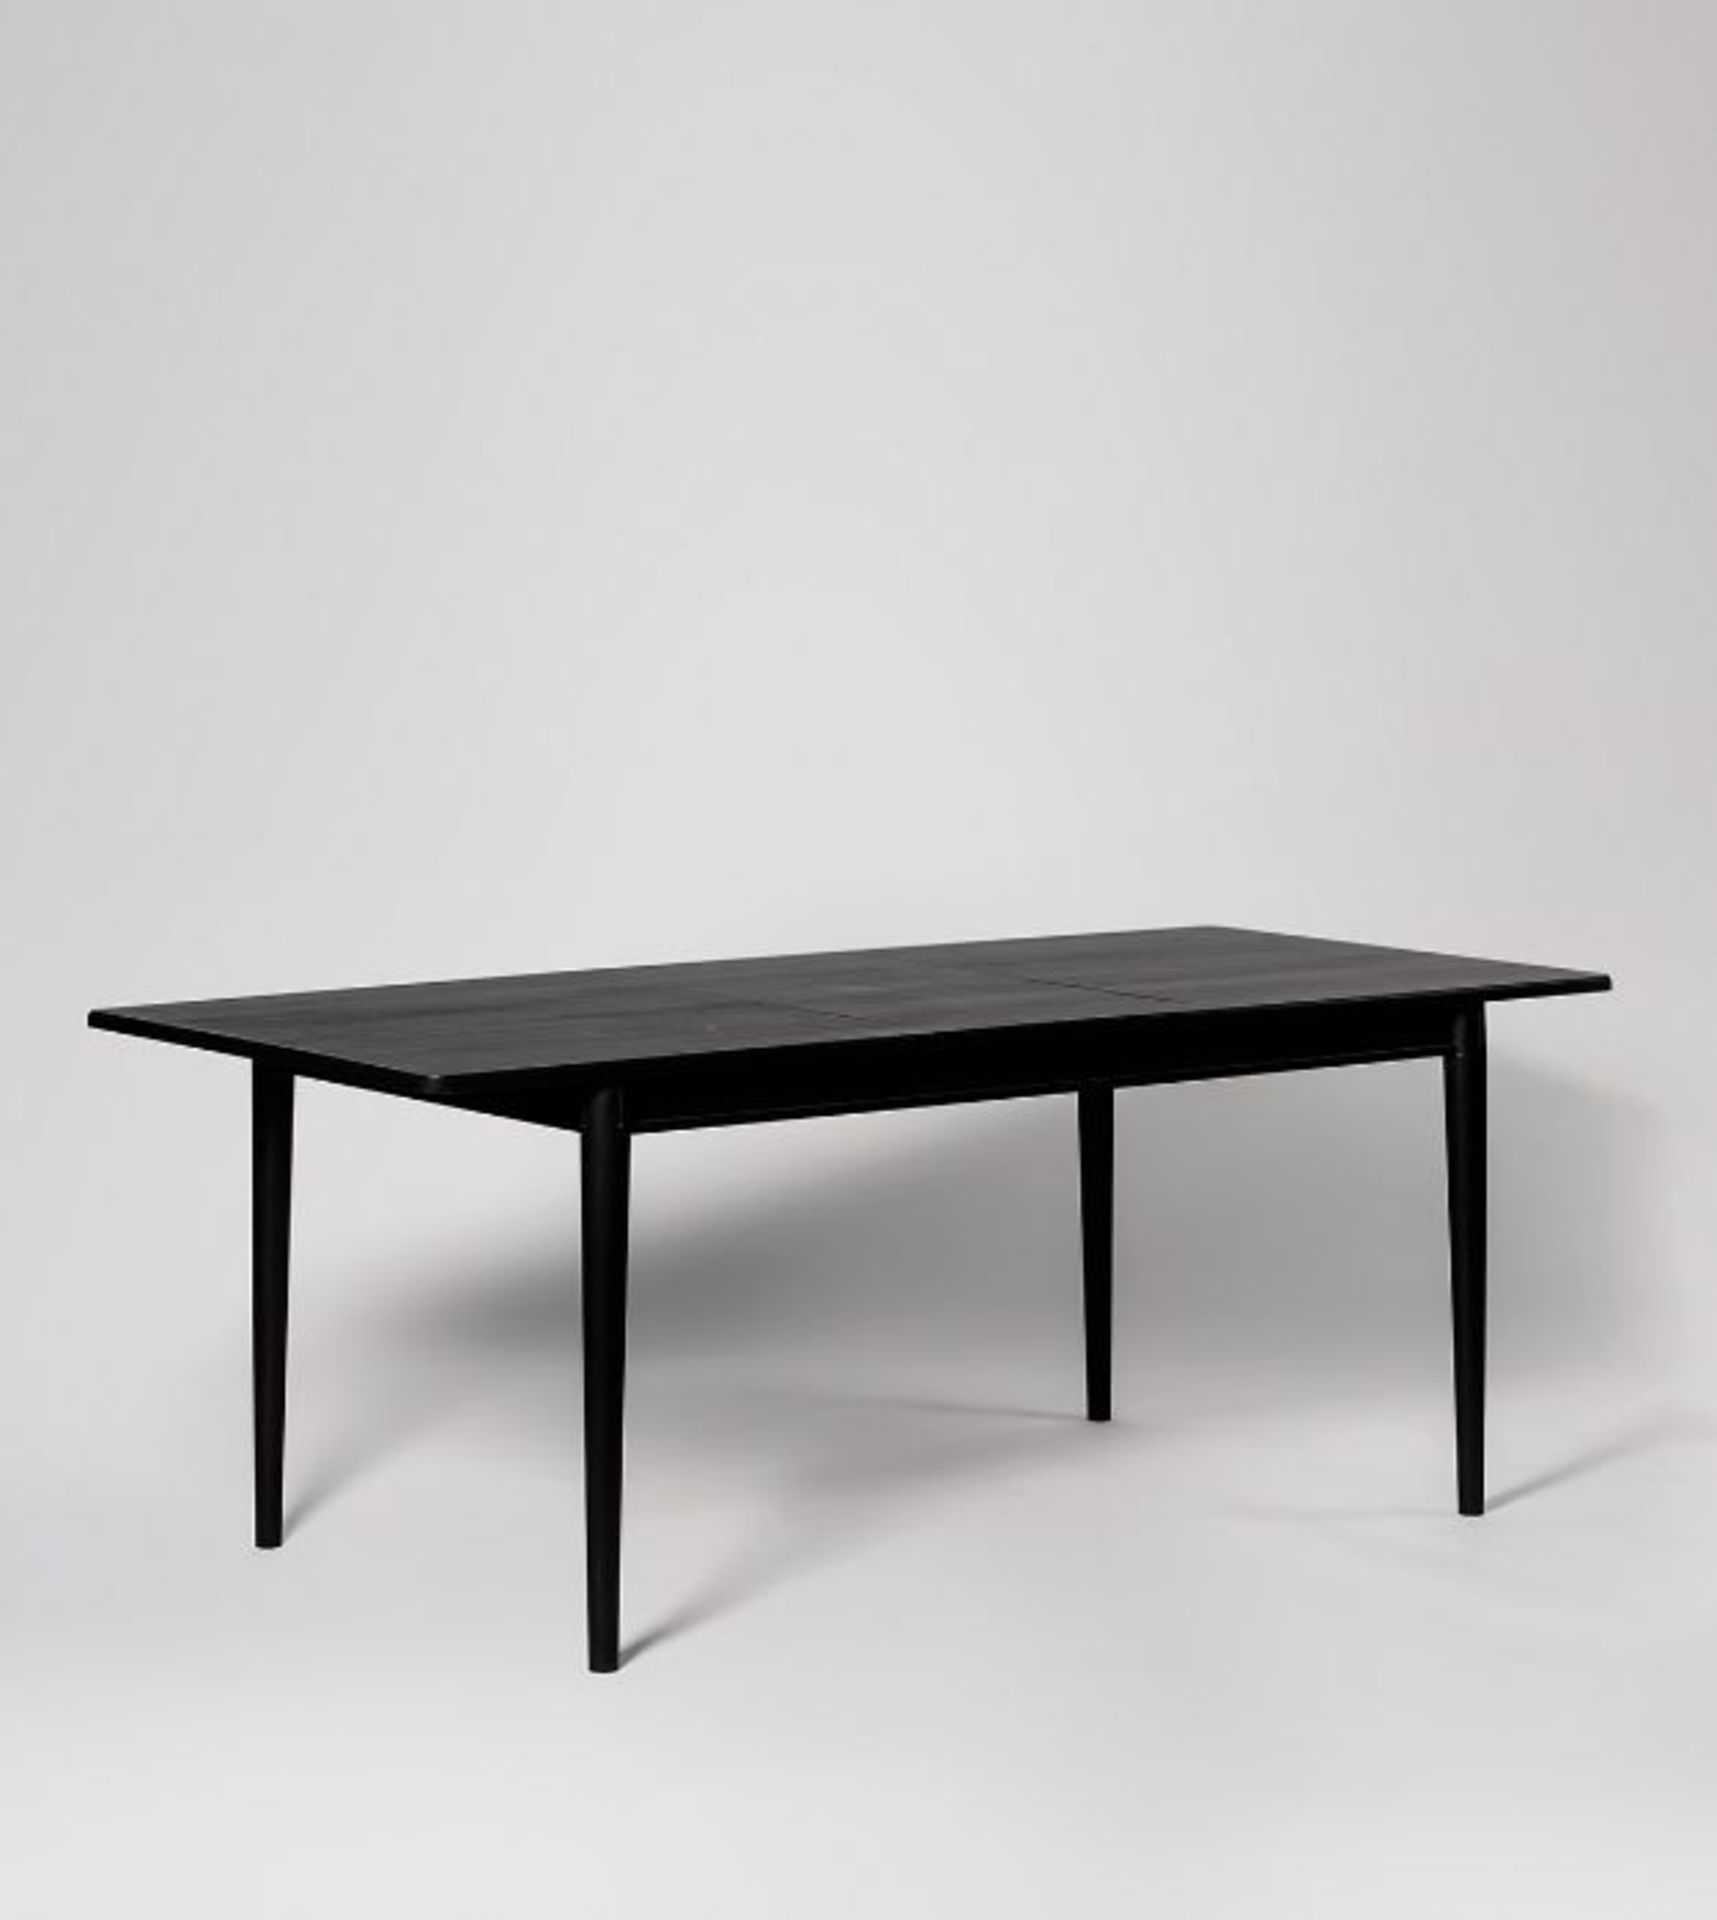 Swoon Reyna Extending Dining Table in Charcoal and Brass RRP ?599 Swoon Reyna Extending Dining Table - Image 7 of 7